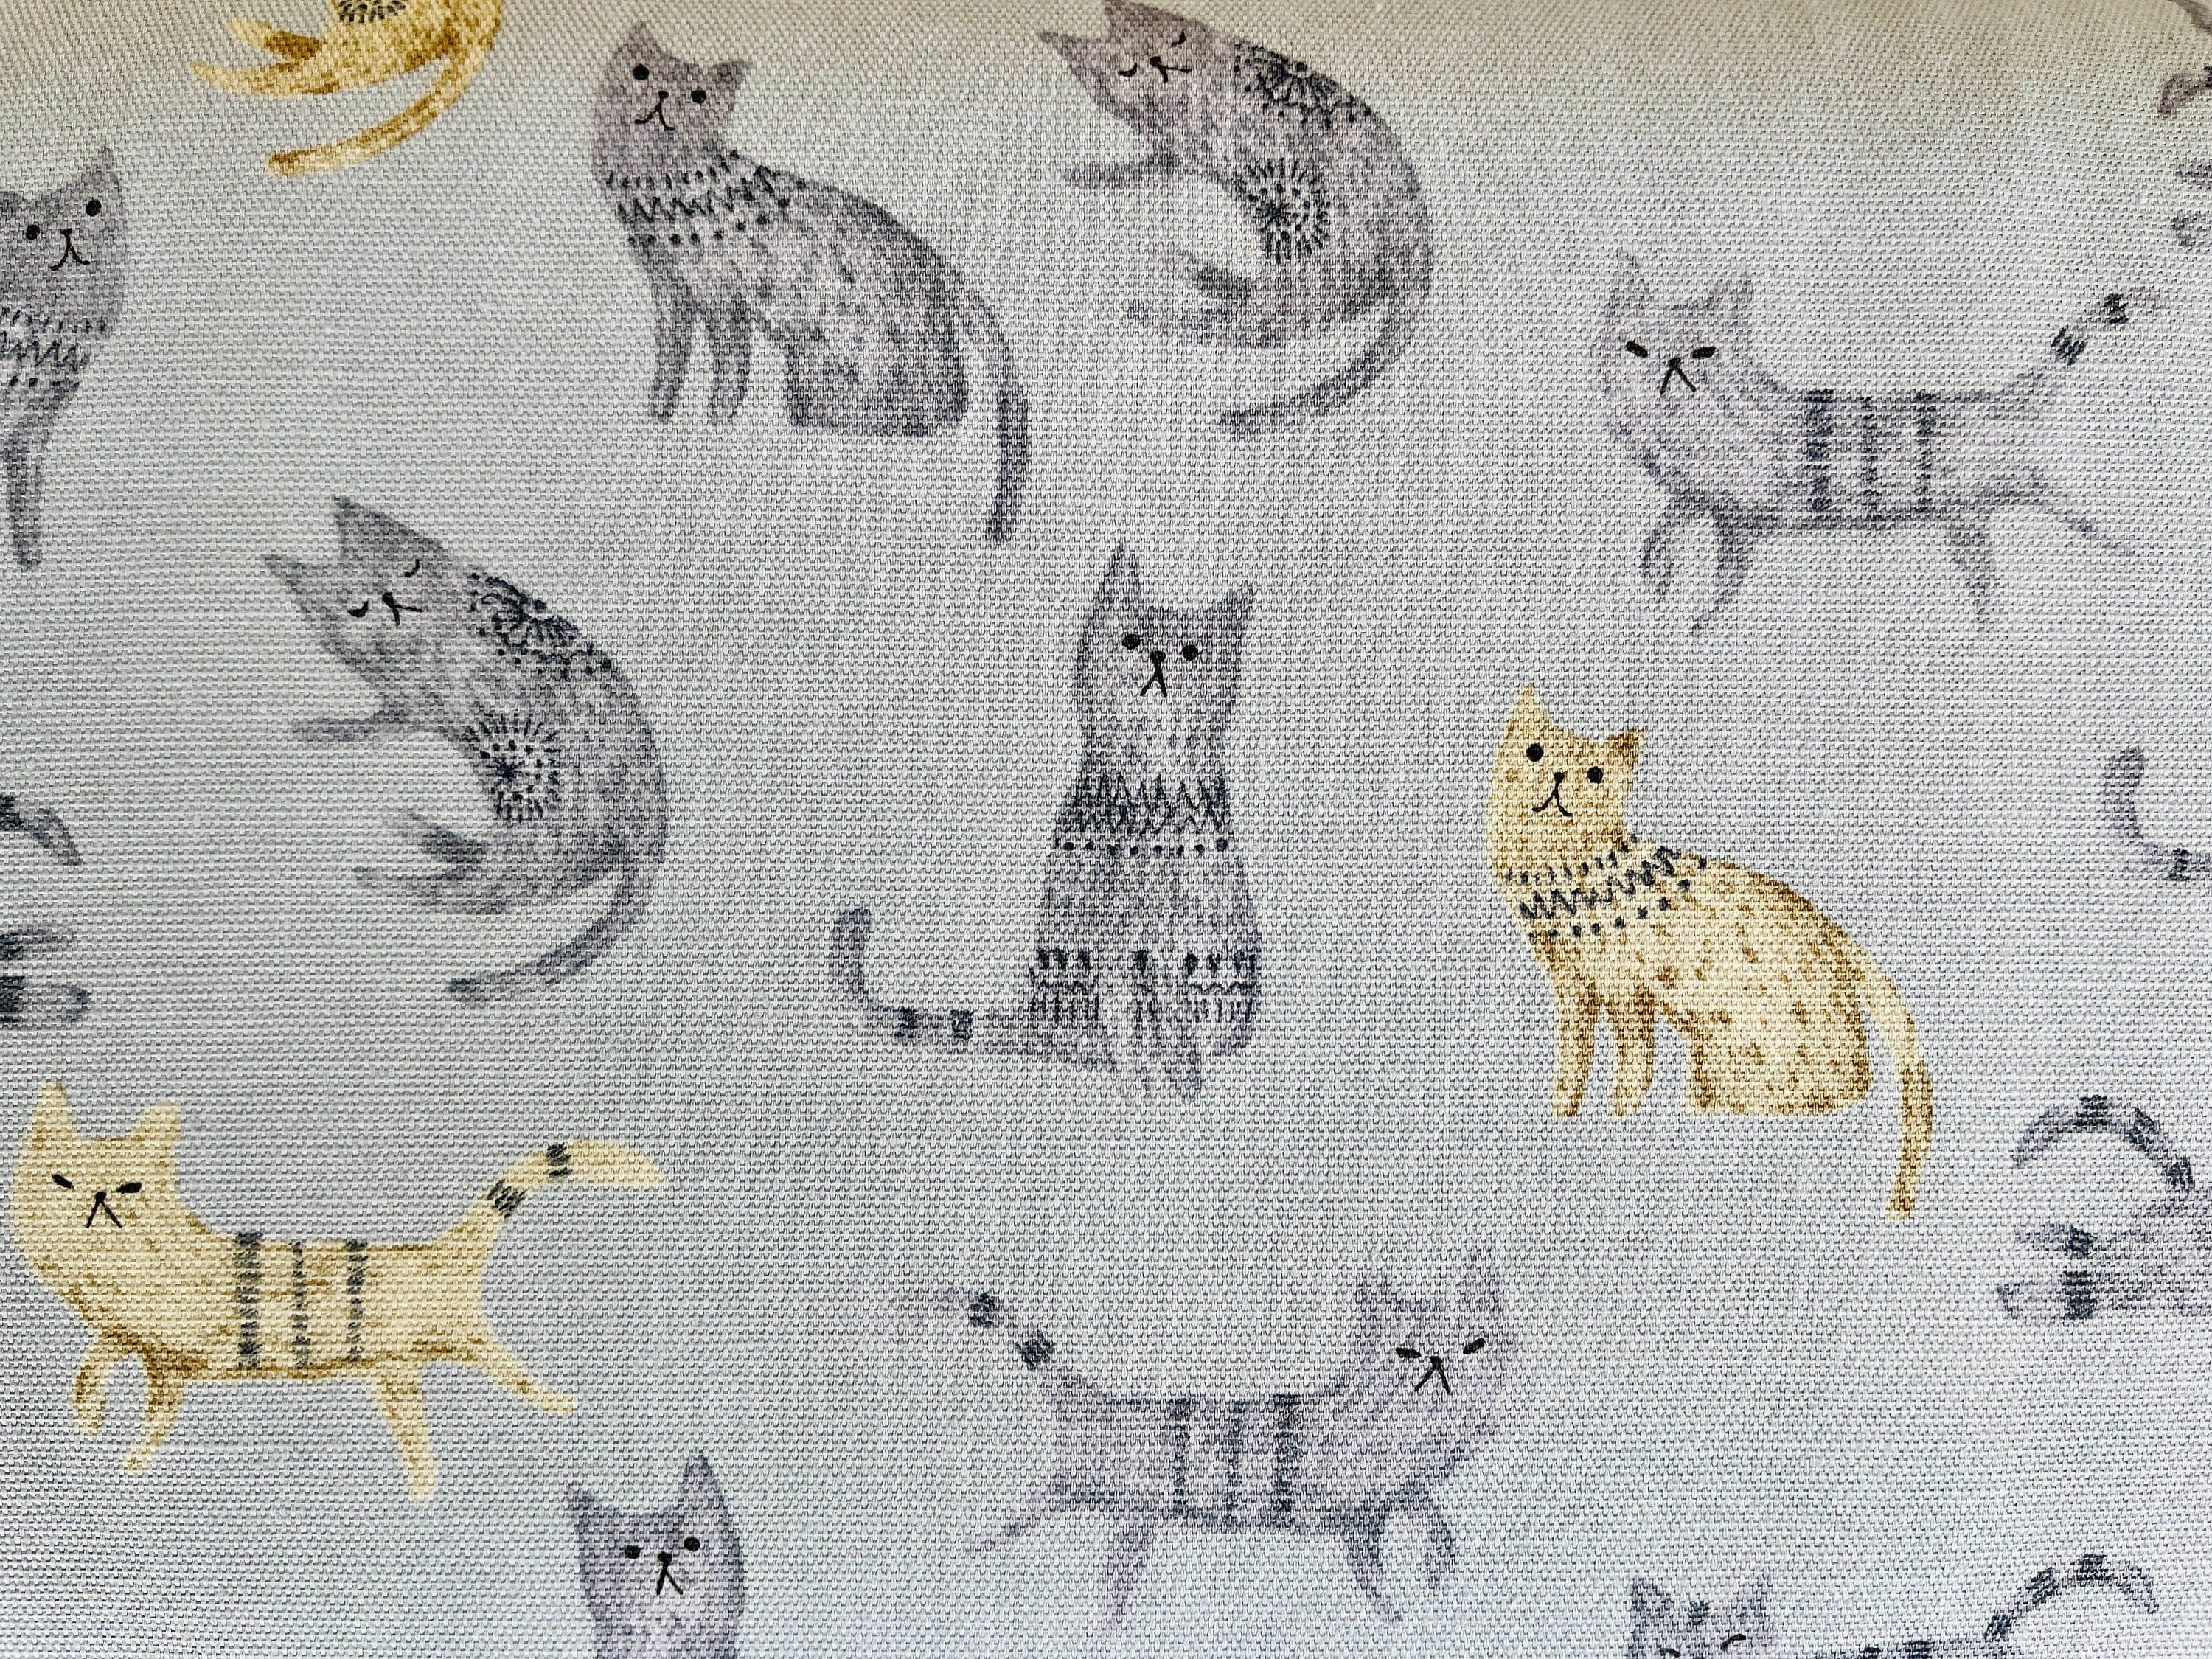 Cat - Cat Fabric - Japanese Fabric - Cotton Oxford Fabric - H-7096 - 1A